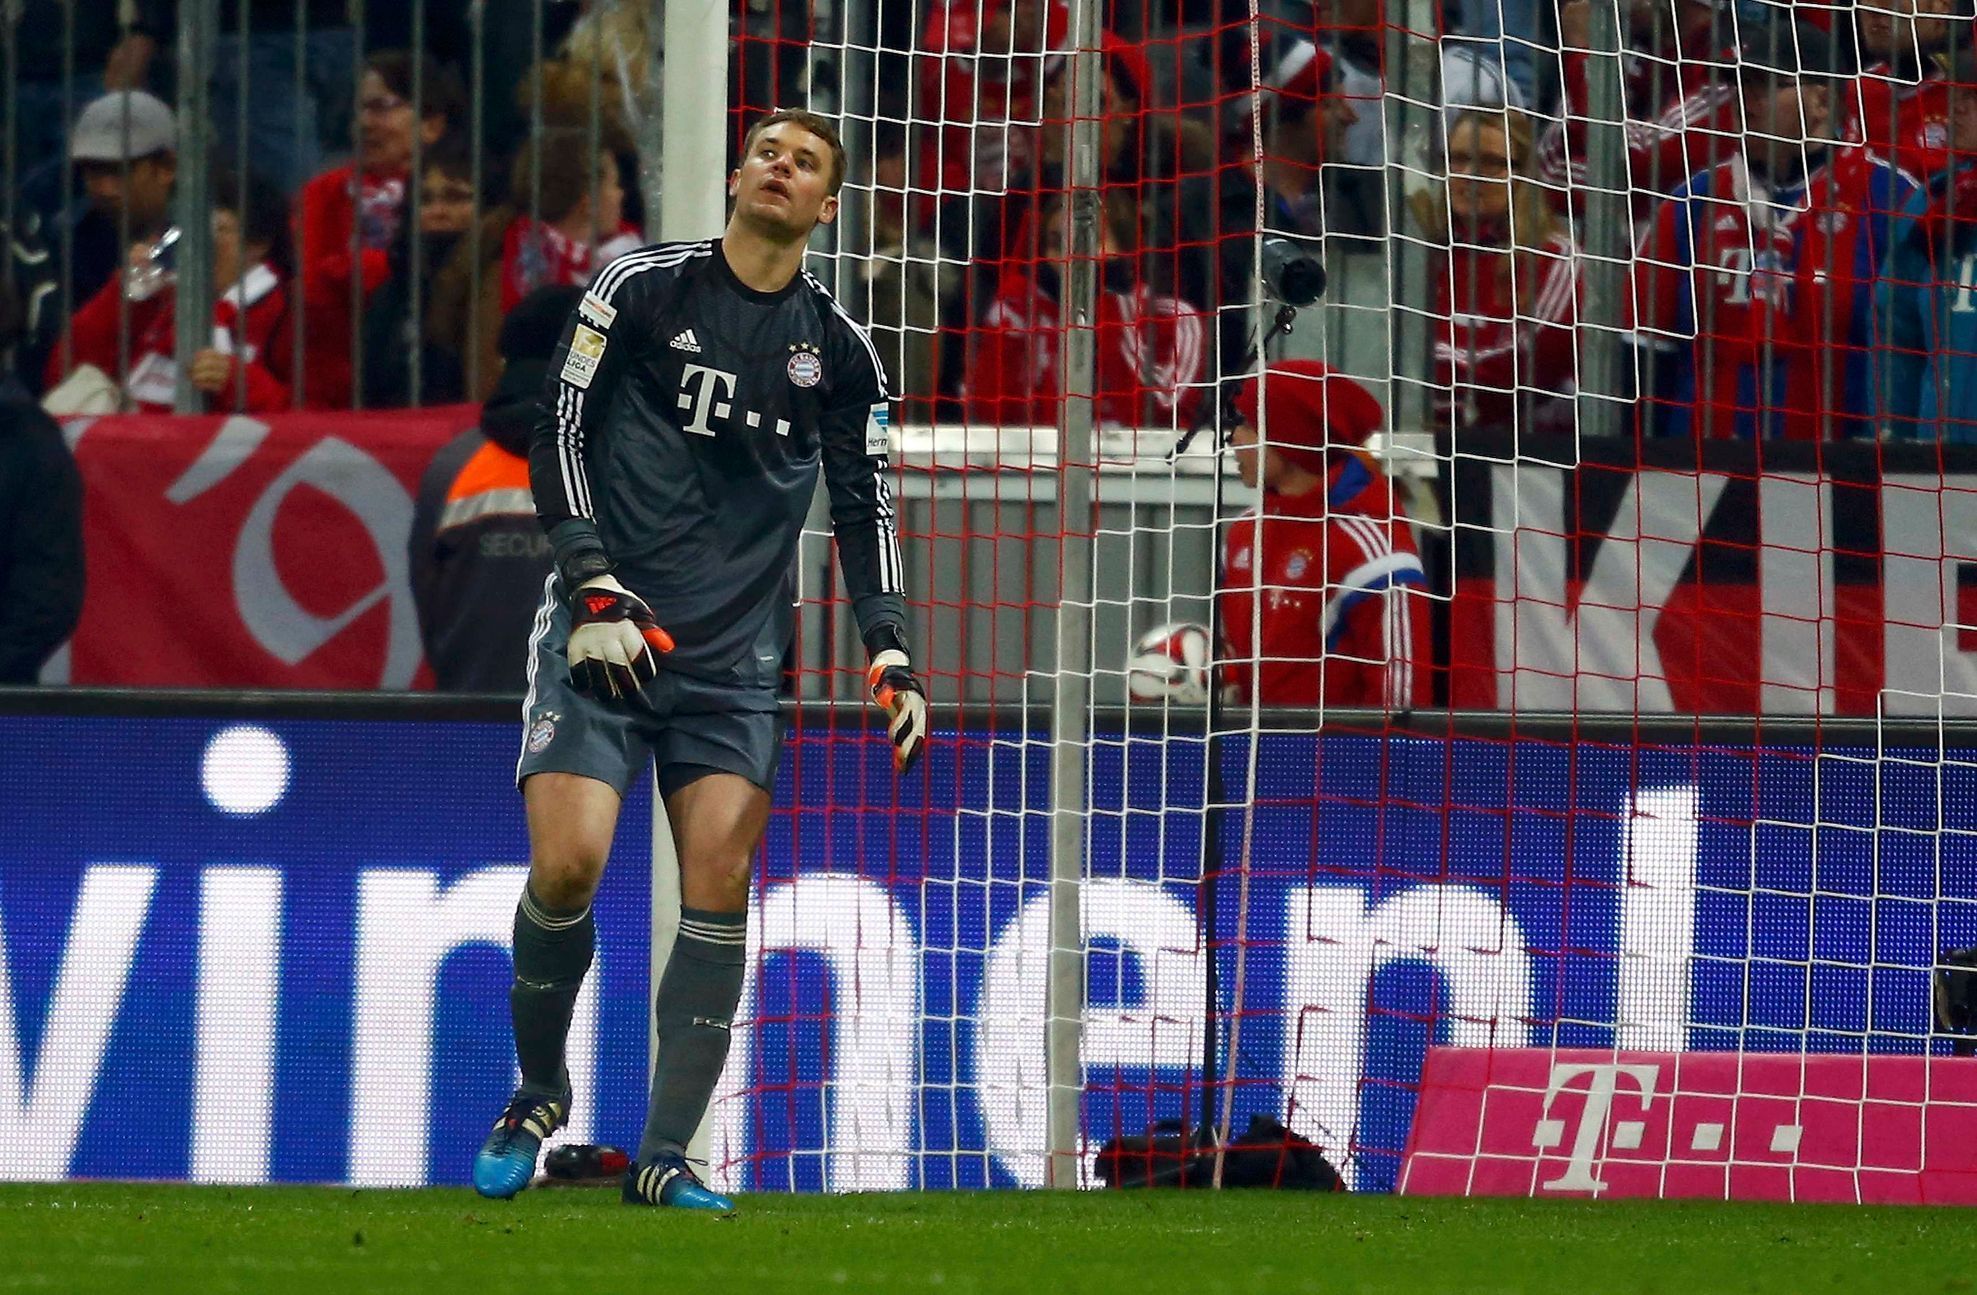 Bayern Munich's goalkeeper Neuer reacts after he failed to save a shot by Borussia Moenchengladbach's Raffael during their Bundesliga first division soccer match in Munich